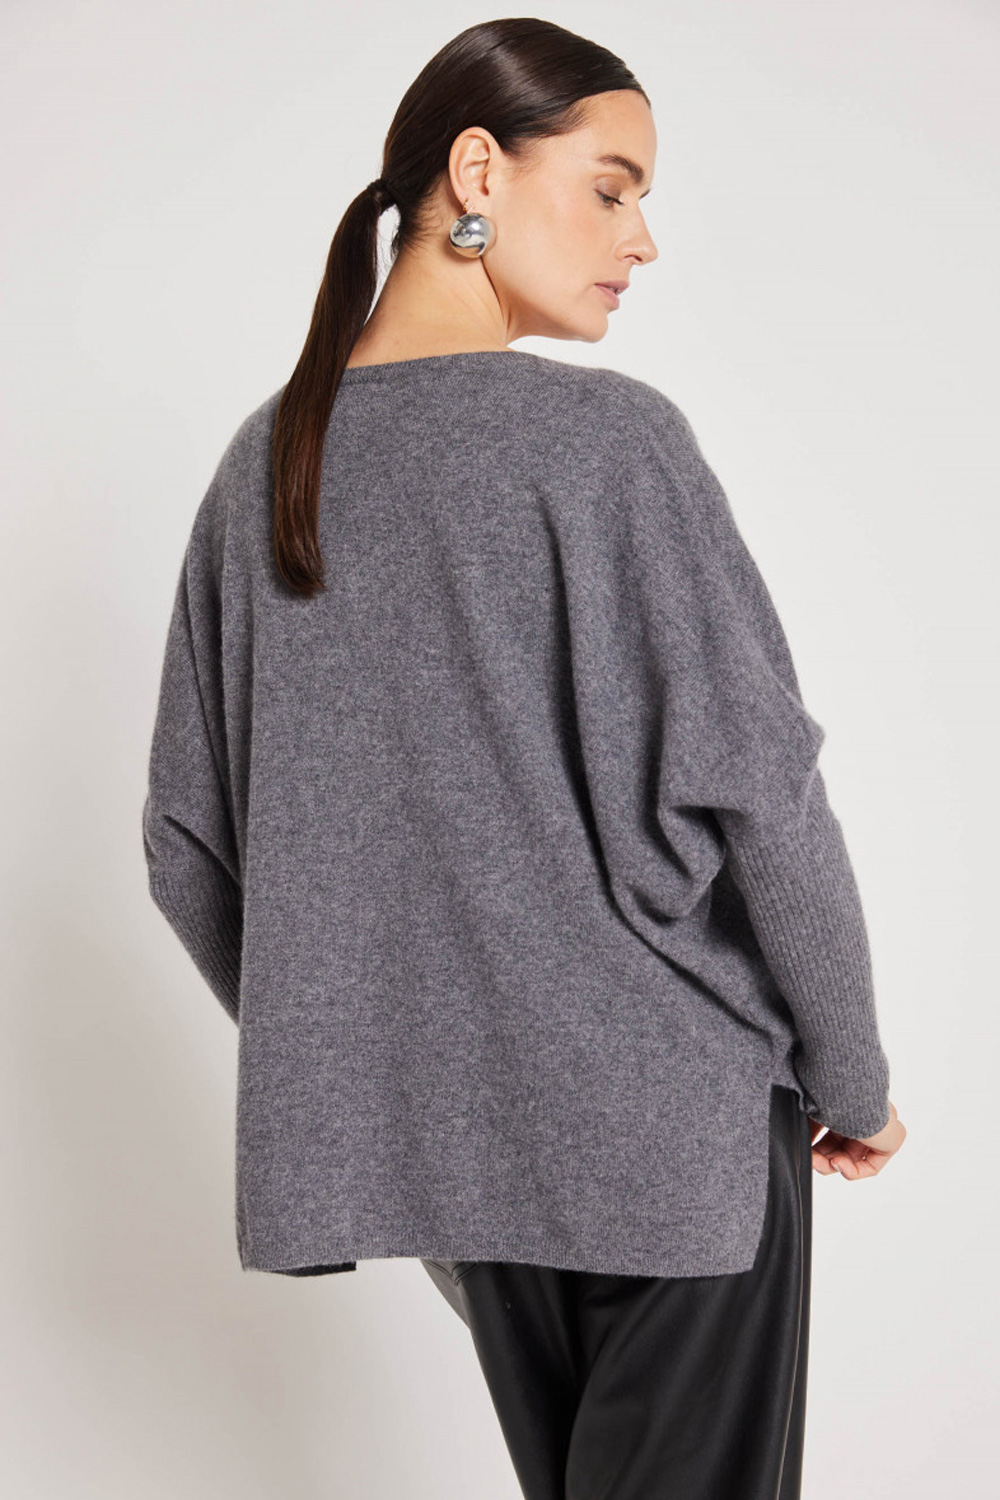 PULL FAUSTINE CHARCOAL FUME